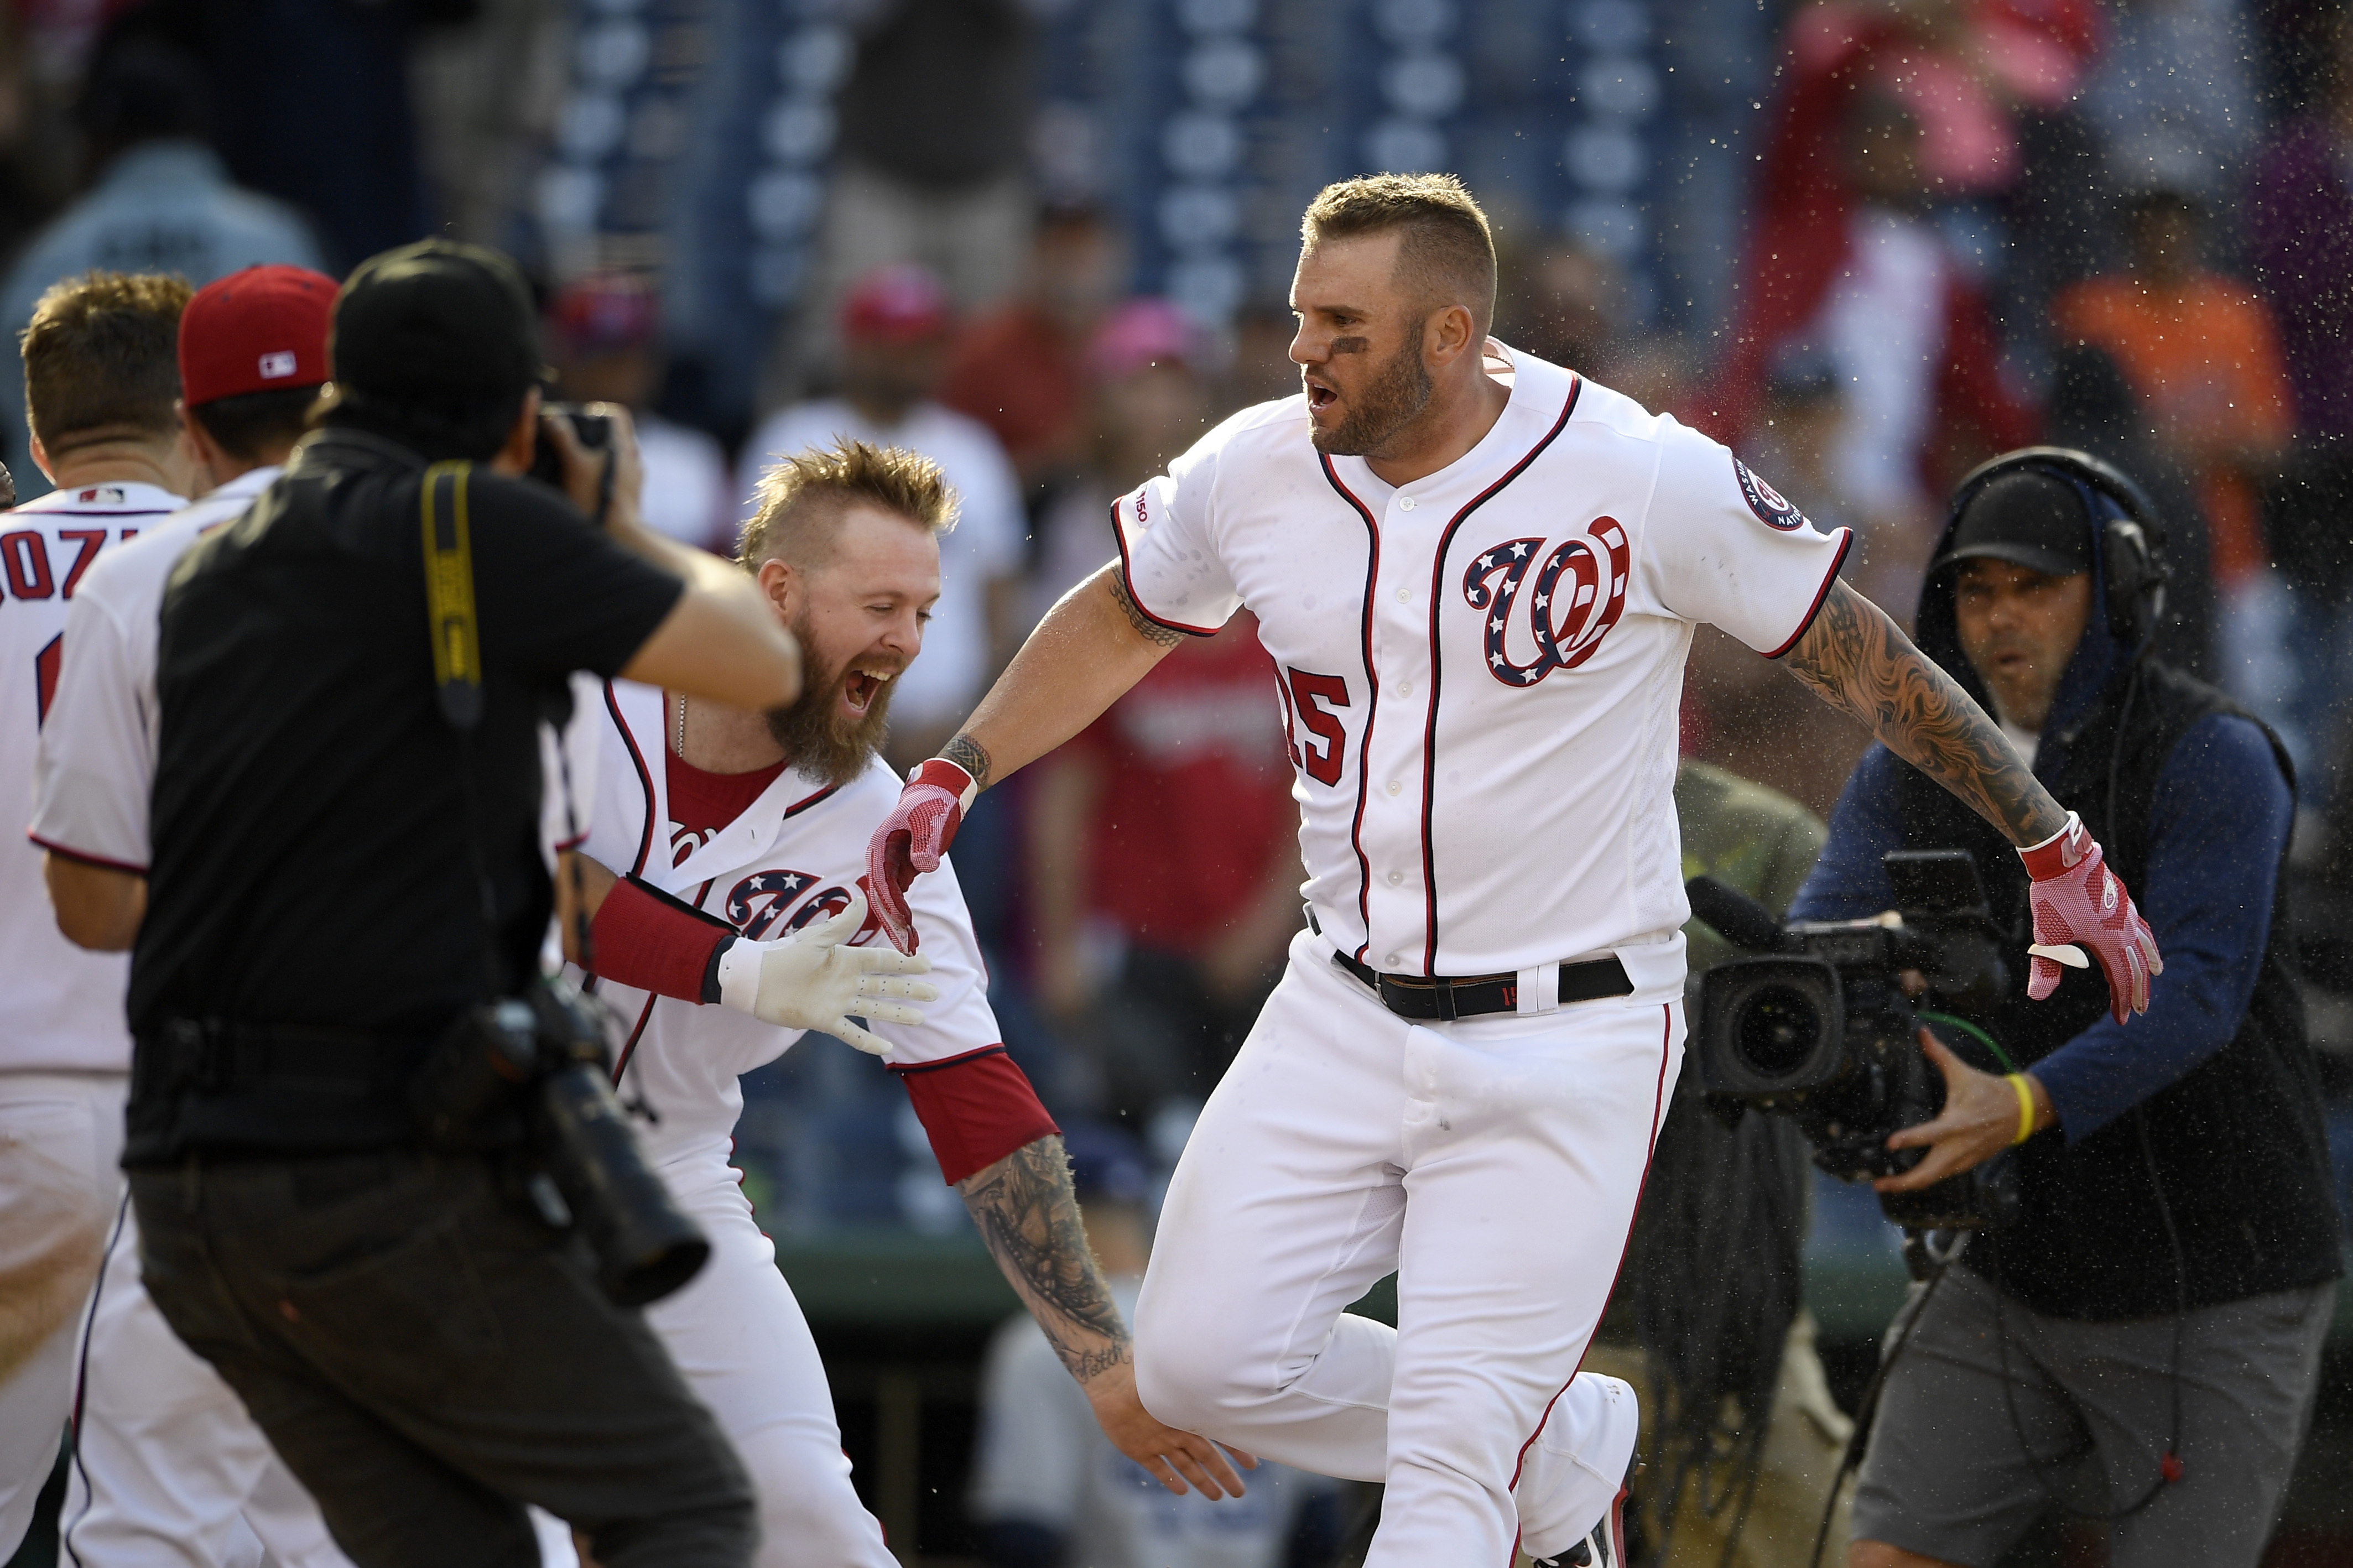 Adams’ 11th-inning homer gives Nats 7-6 win over Padres